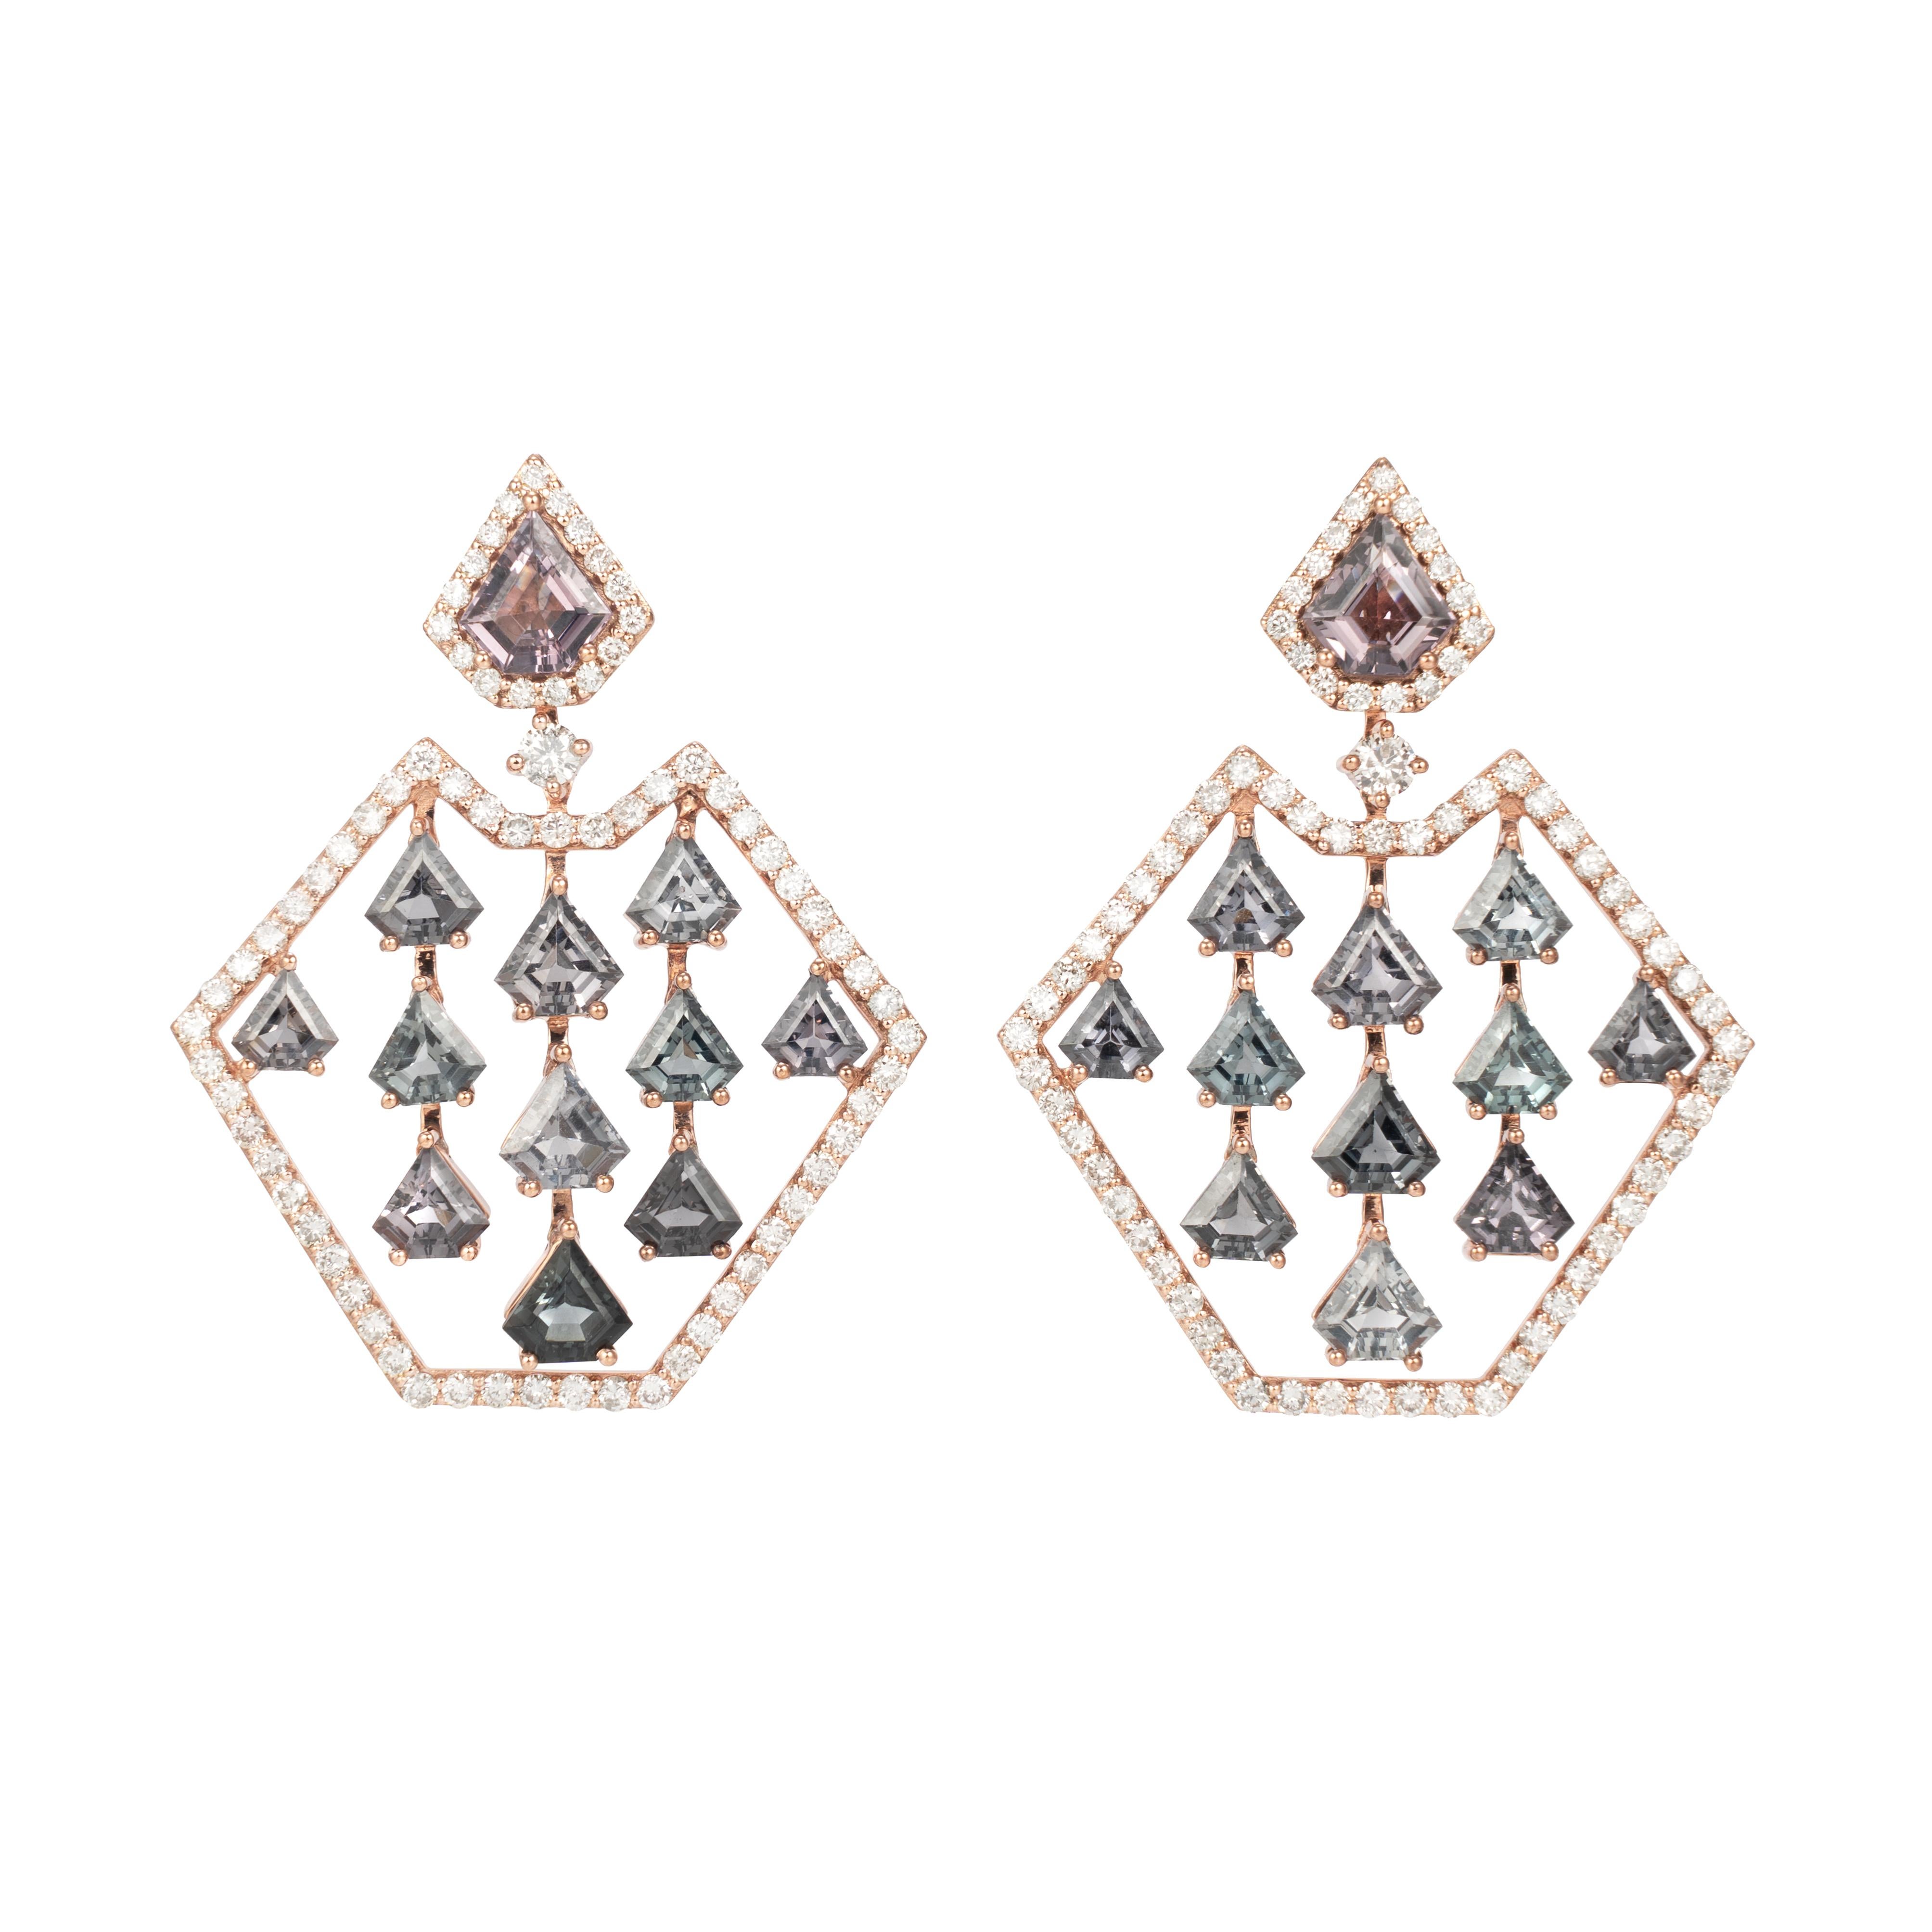 Light and easy to wear these earrings showcase multicolor fancy cut spinels accented with  diamonds. These earrings are dainty yet have a great pop of color from the vibrant gems.

Multicolor Mismatch Spinel Earrings with Diamond in 18 Karat Rose